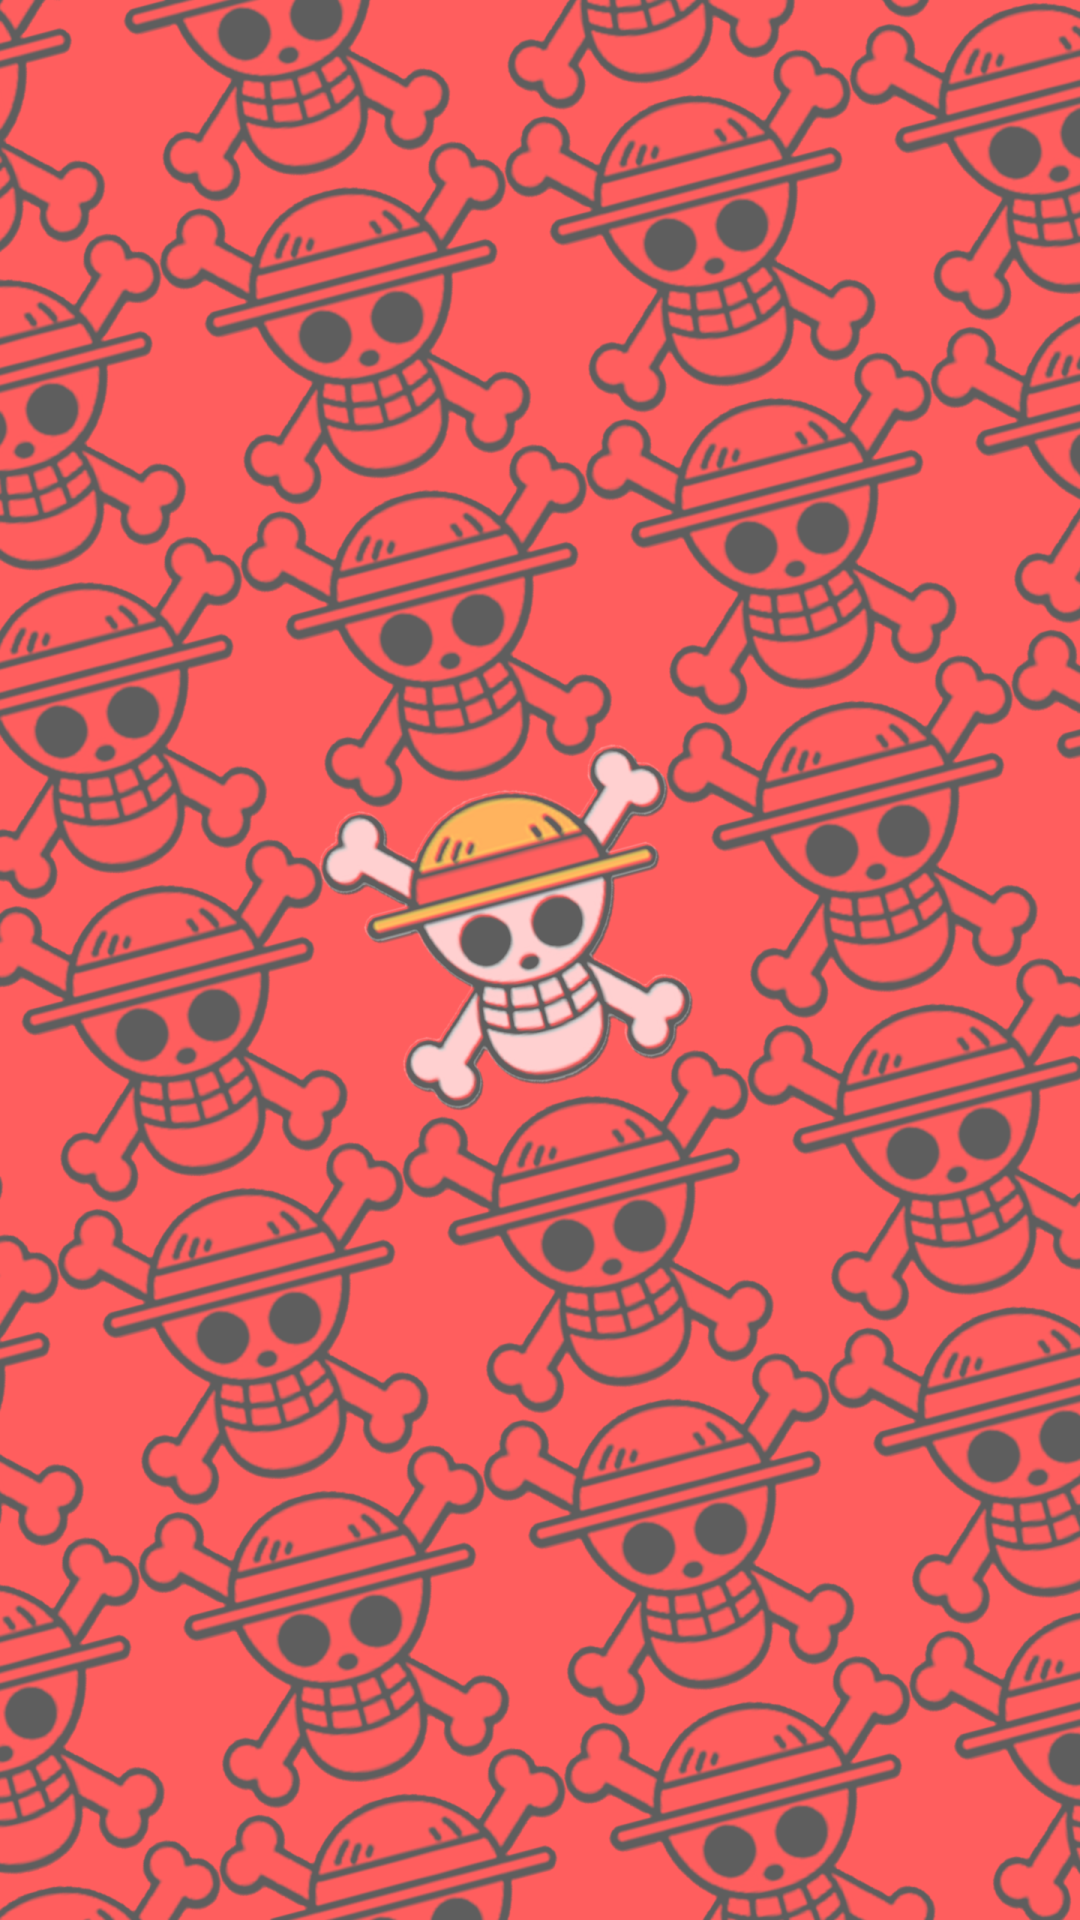 One Piece Phone Wallpapers